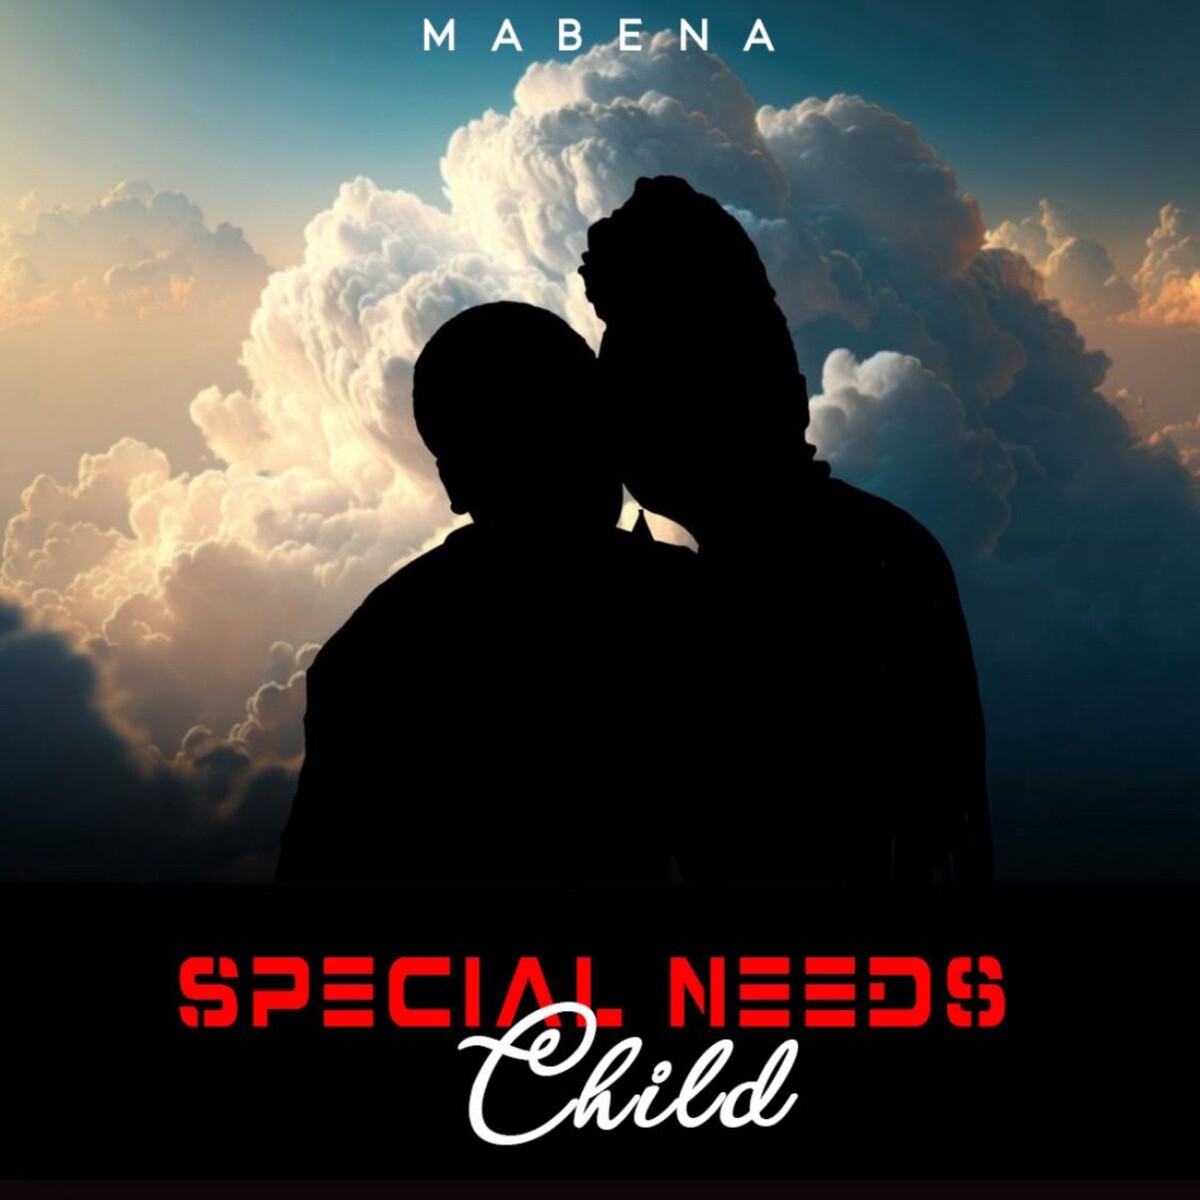 Art for My Special Needs Child by Mabena